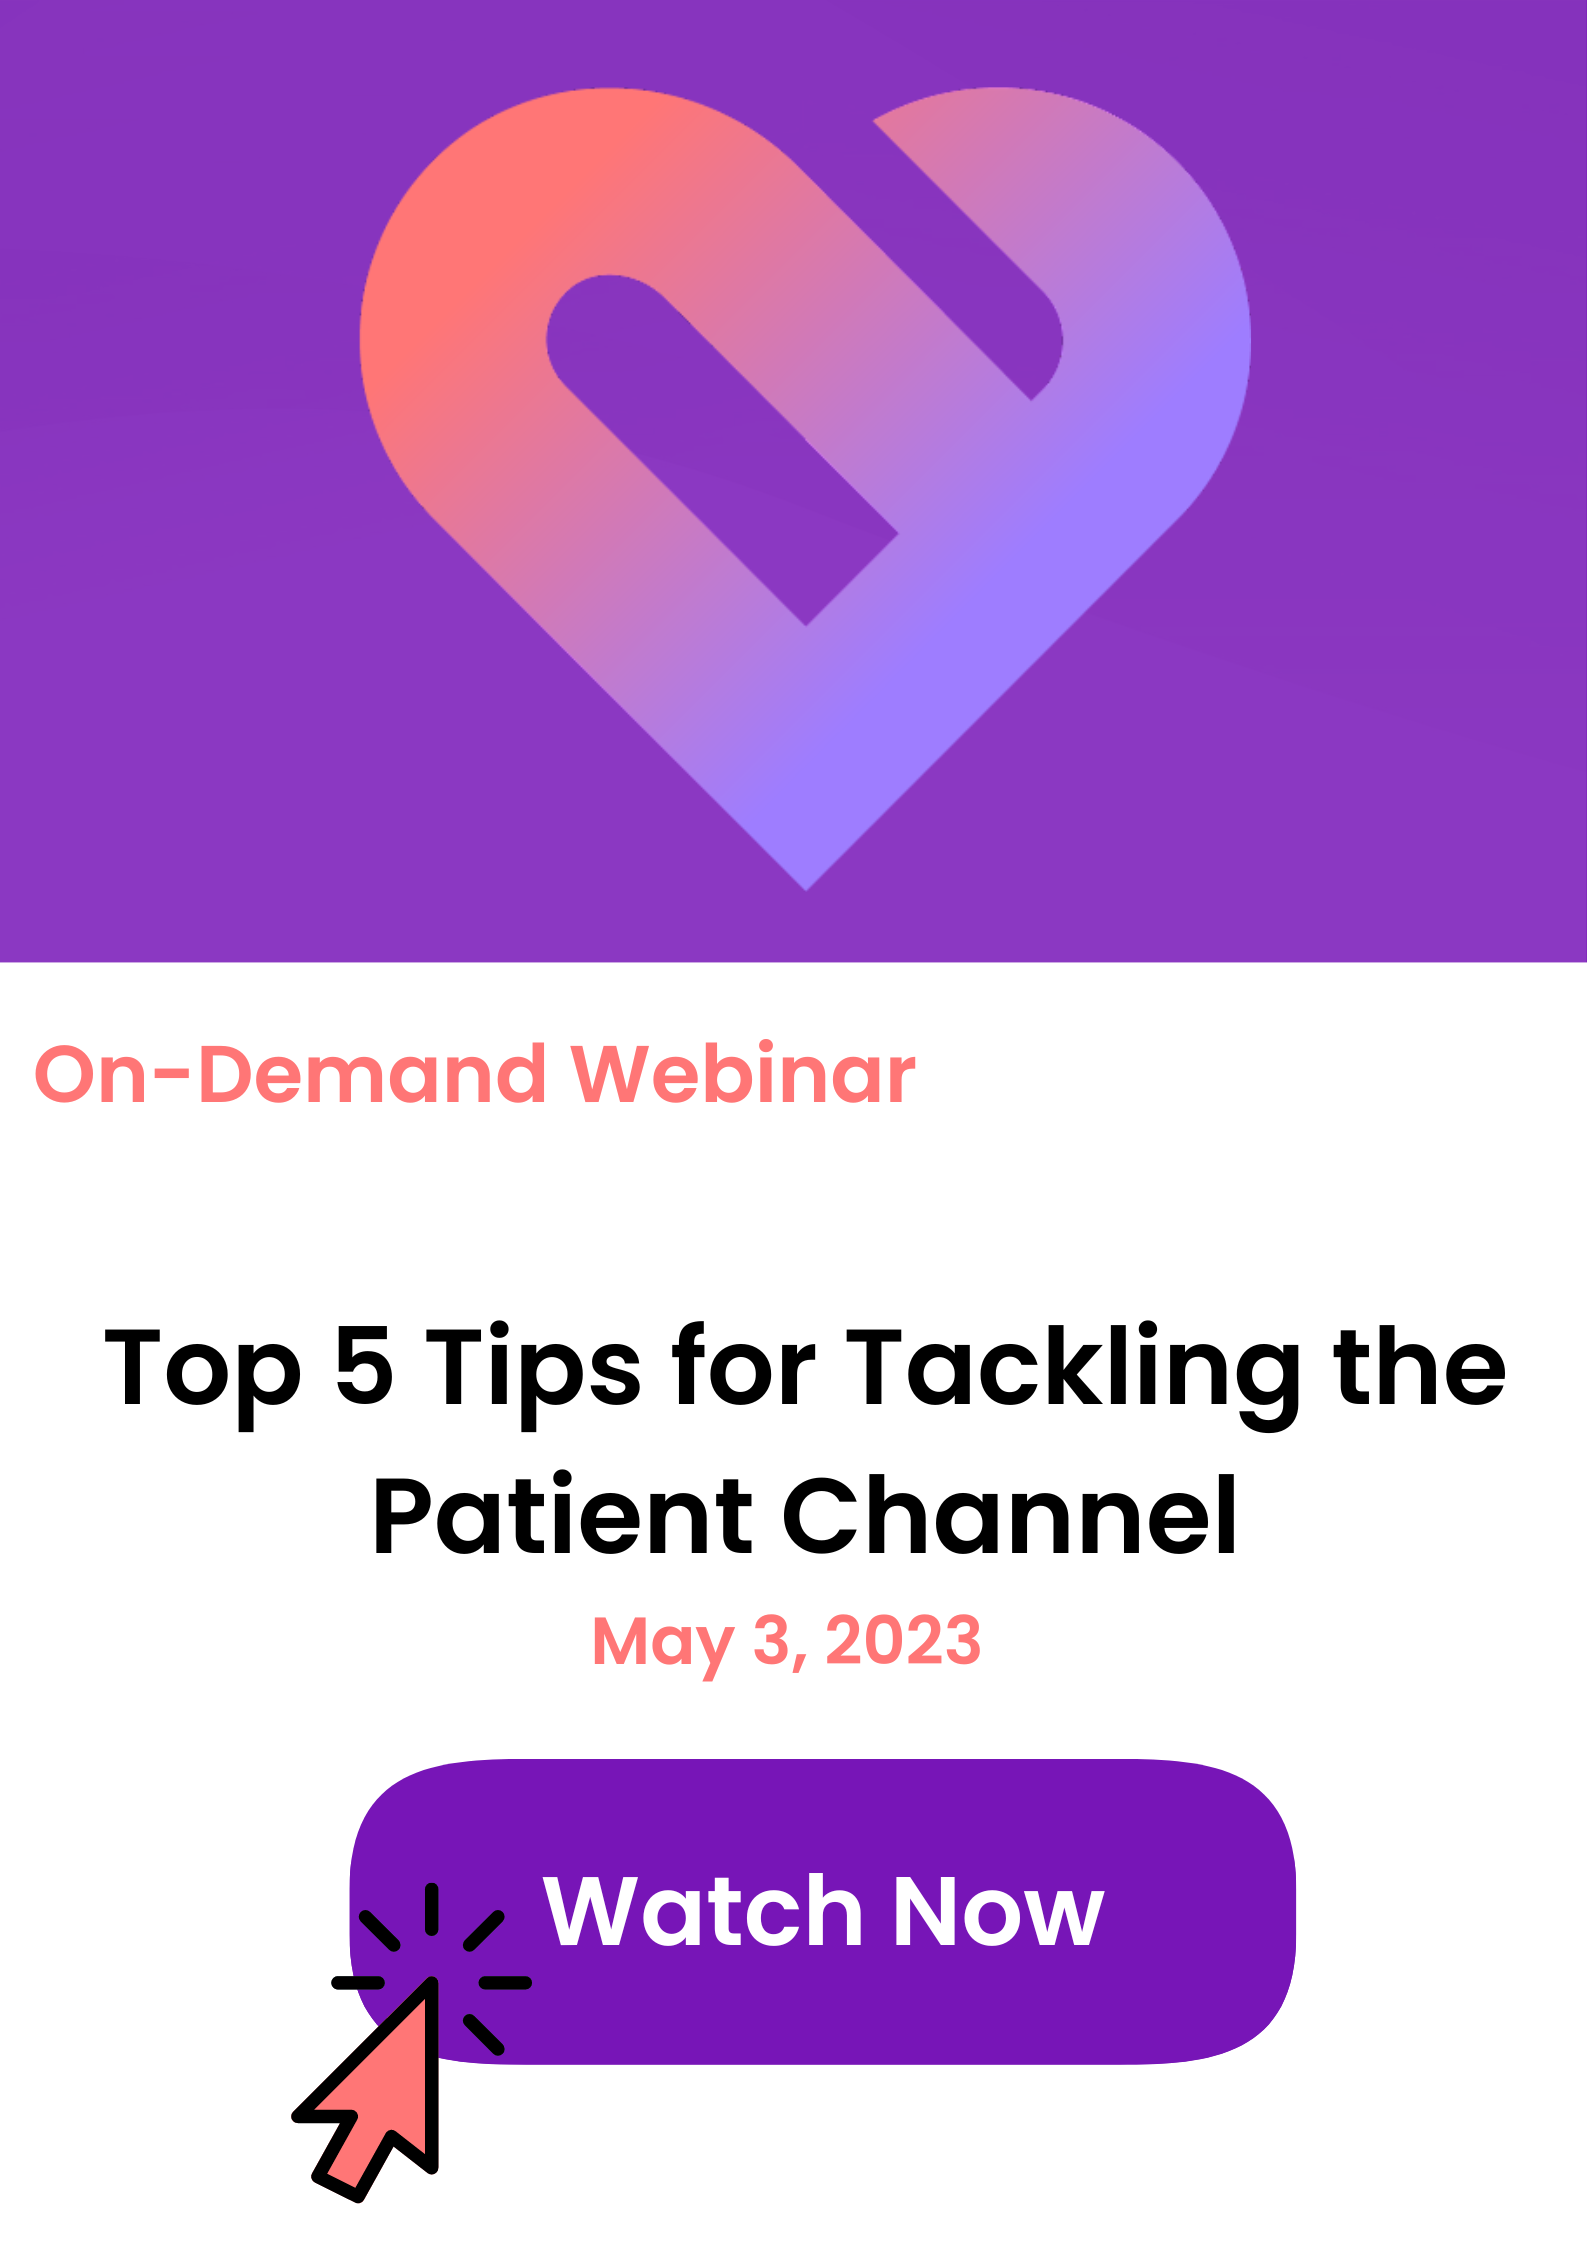 On-Demand webinar tile for Top 5 Tips for Tackling the Patient Channel